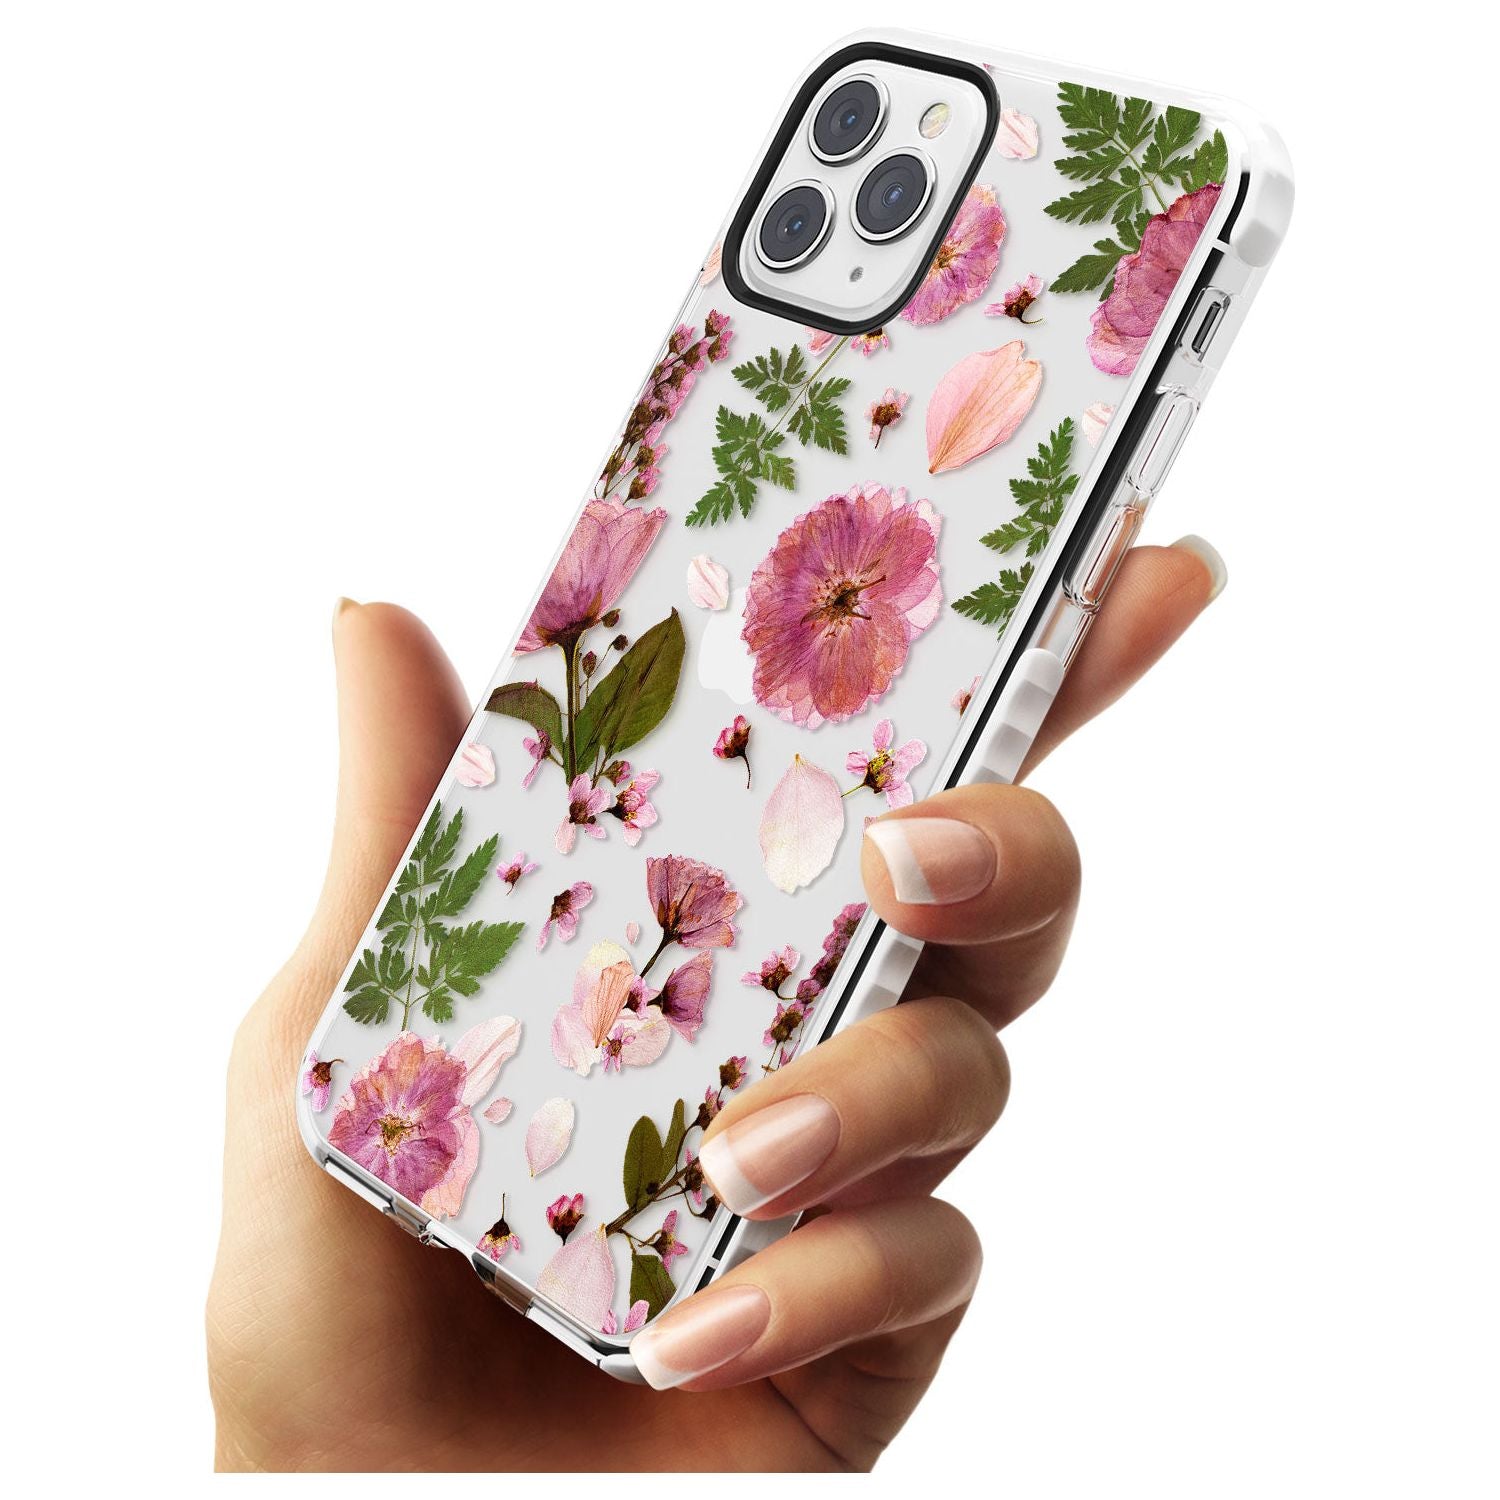 Natural Arrangement of Flowers & Leaves Design Impact Phone Case for iPhone 11 Pro Max